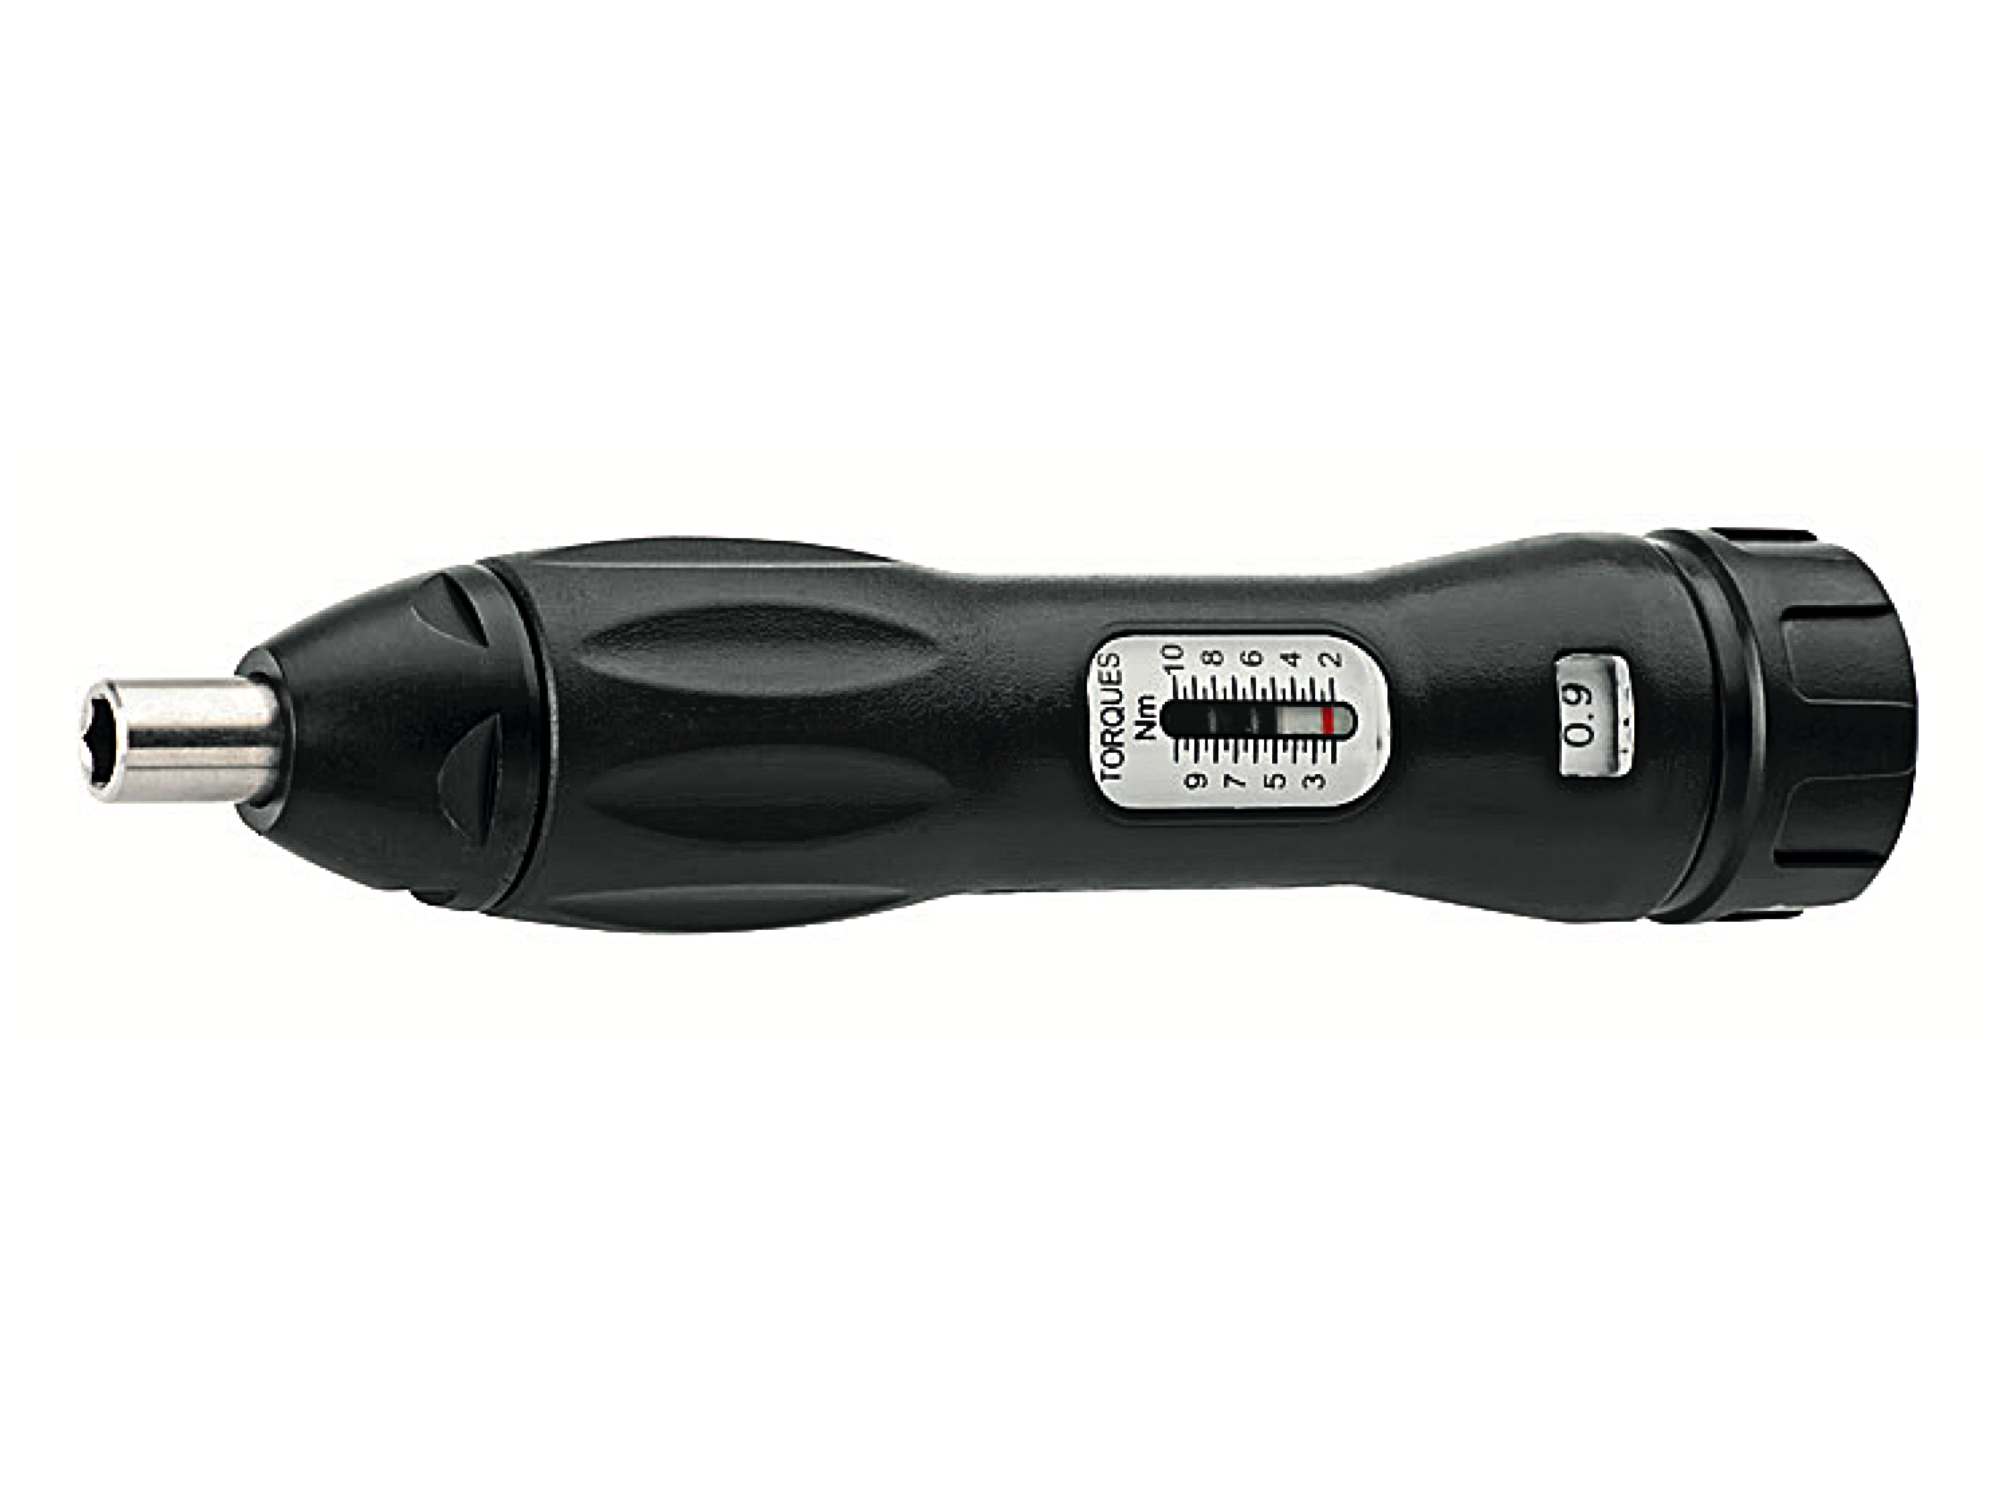 ELORA 2011-1000 1/4" Torque Wrench Screwdriver (ELORA Tools) - Premium 1/4" Torque Wrench from ELORA - Shop now at Yew Aik.